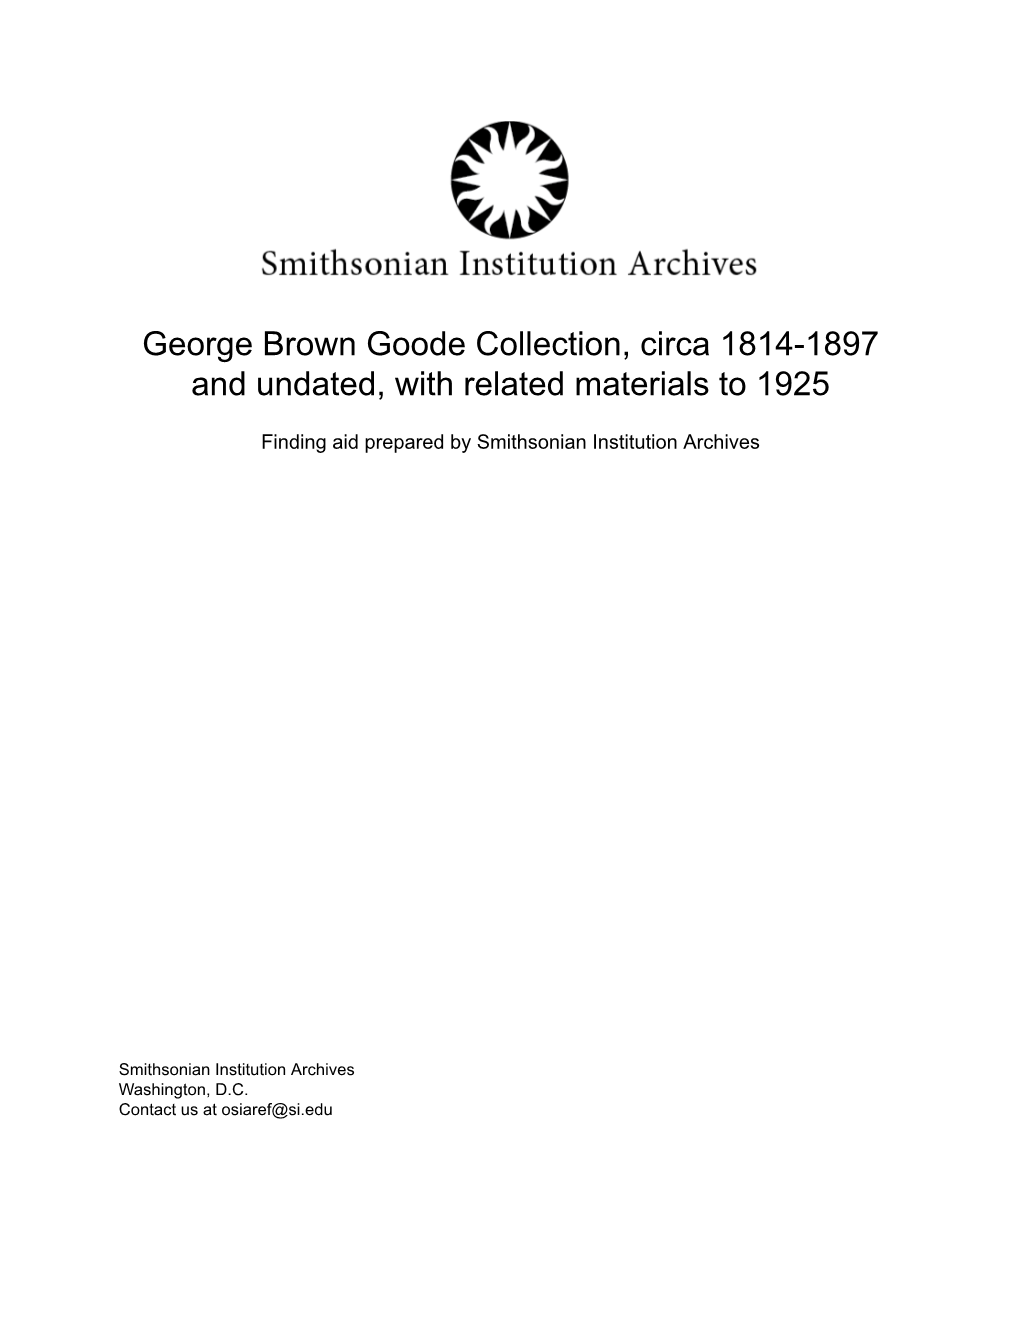 George Brown Goode Collection, Circa 1814-1897 and Undated, with Related Materials to 1925